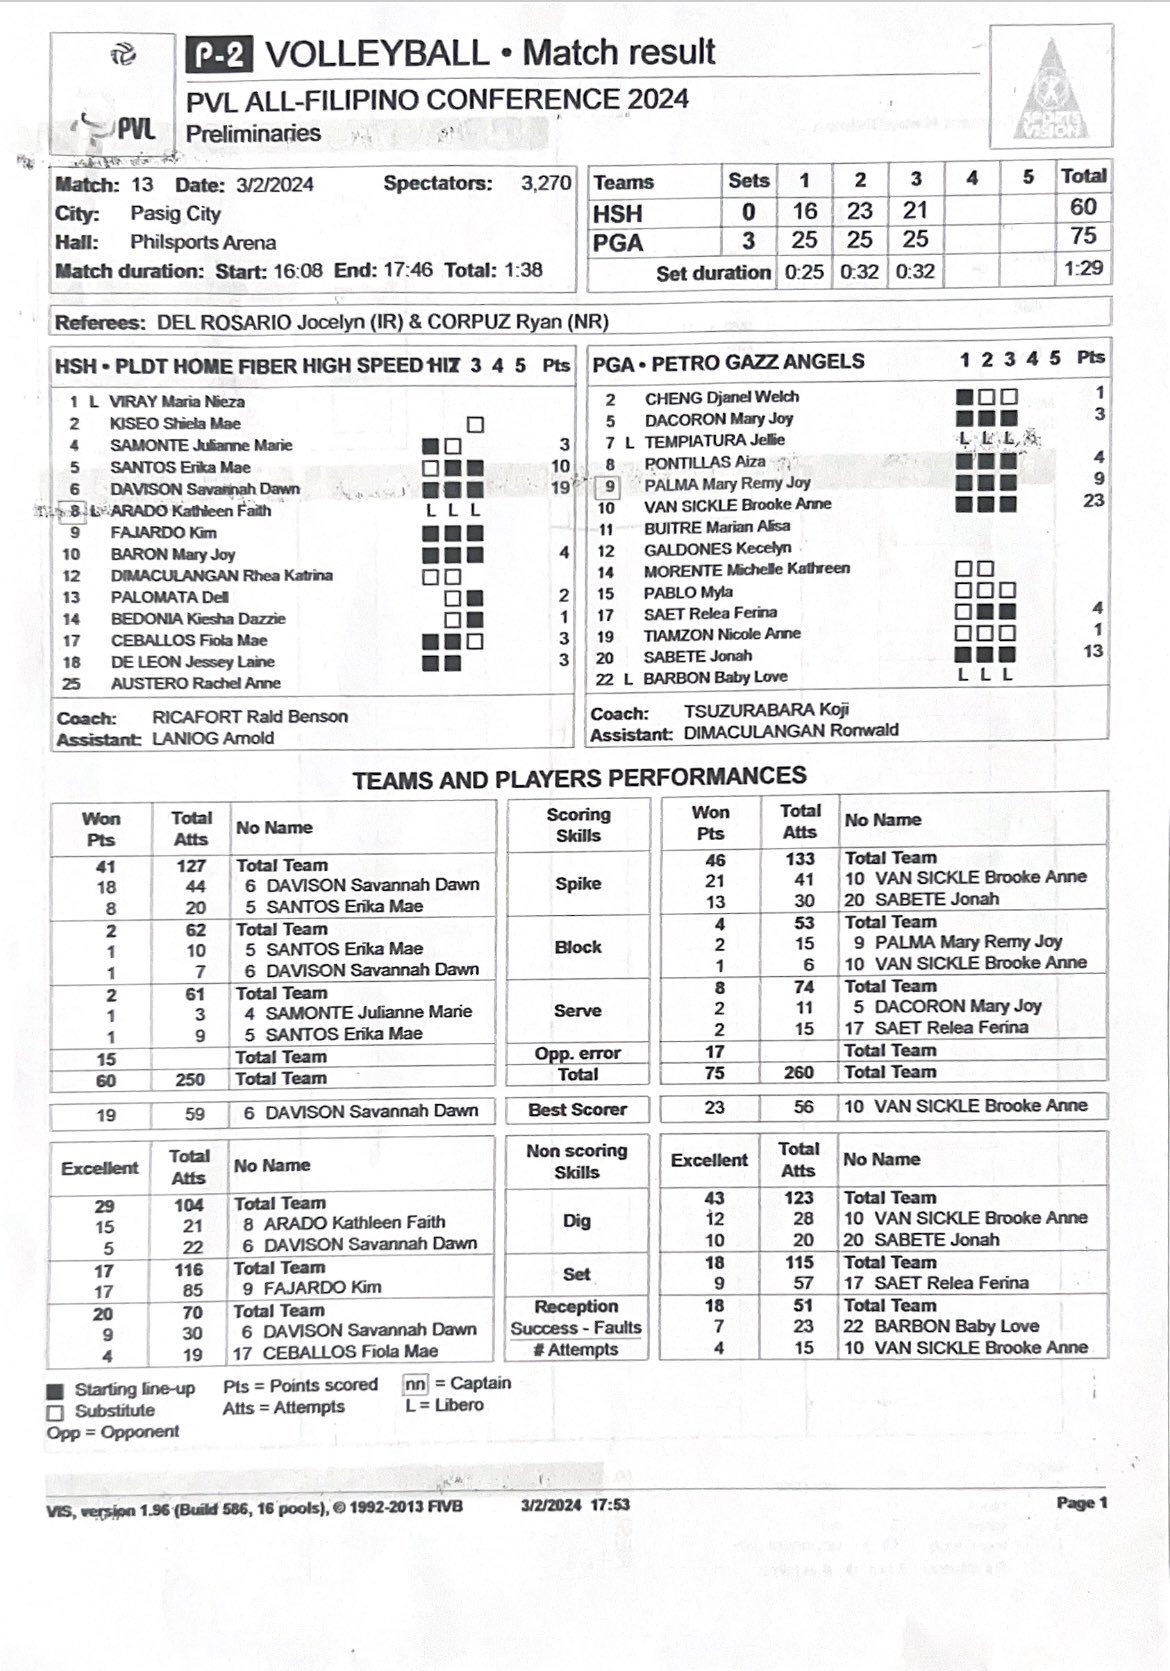 STATS: Petro gazz Angels vs PLDT High Speed Hitters March 3